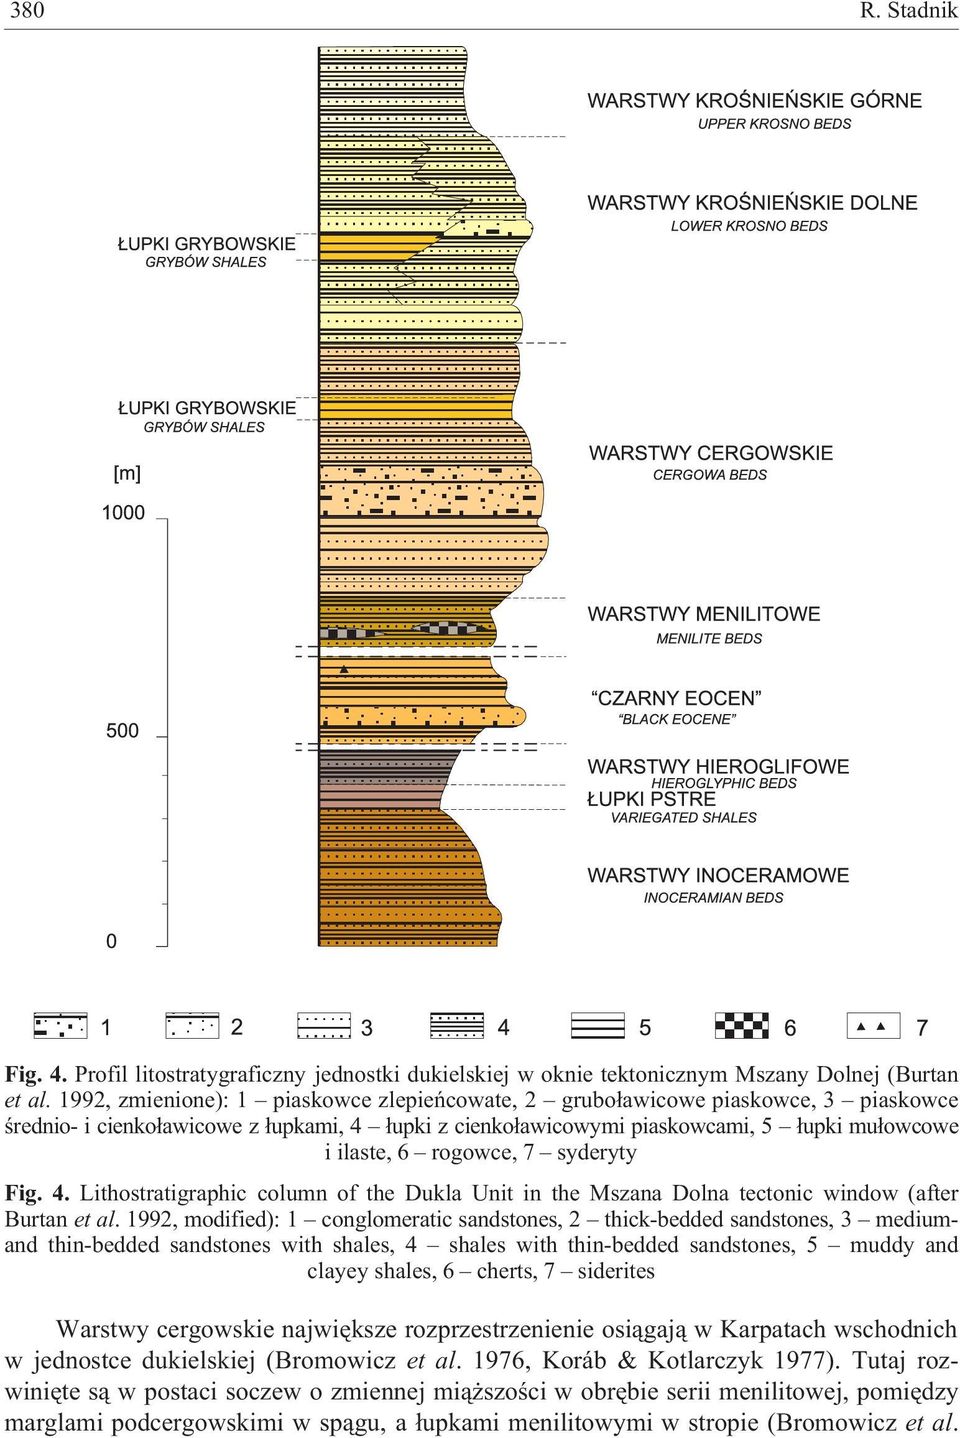 7 syderyty Fig. 4. Lithtigraphic column of the Dukla Unit in the Mszana Dolna tectonic window (after Burtan et al.